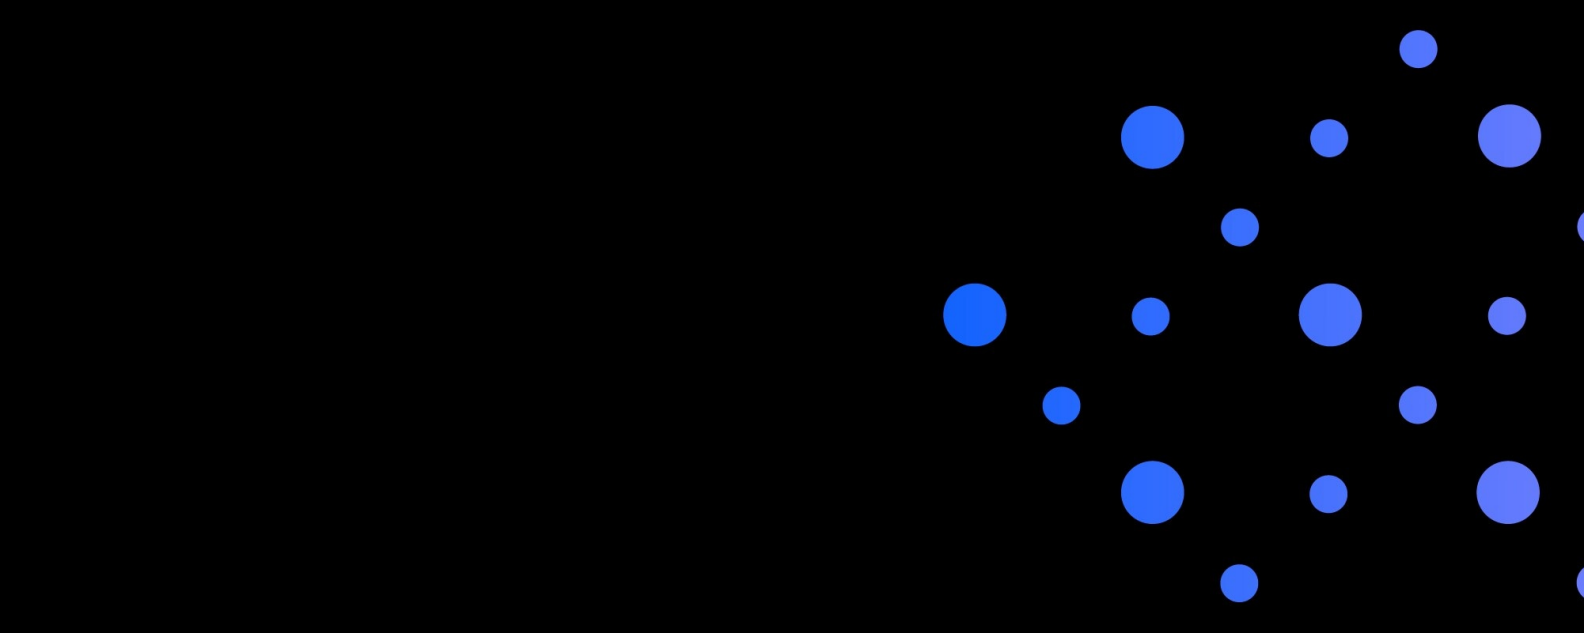 Lead space image with large blue dots